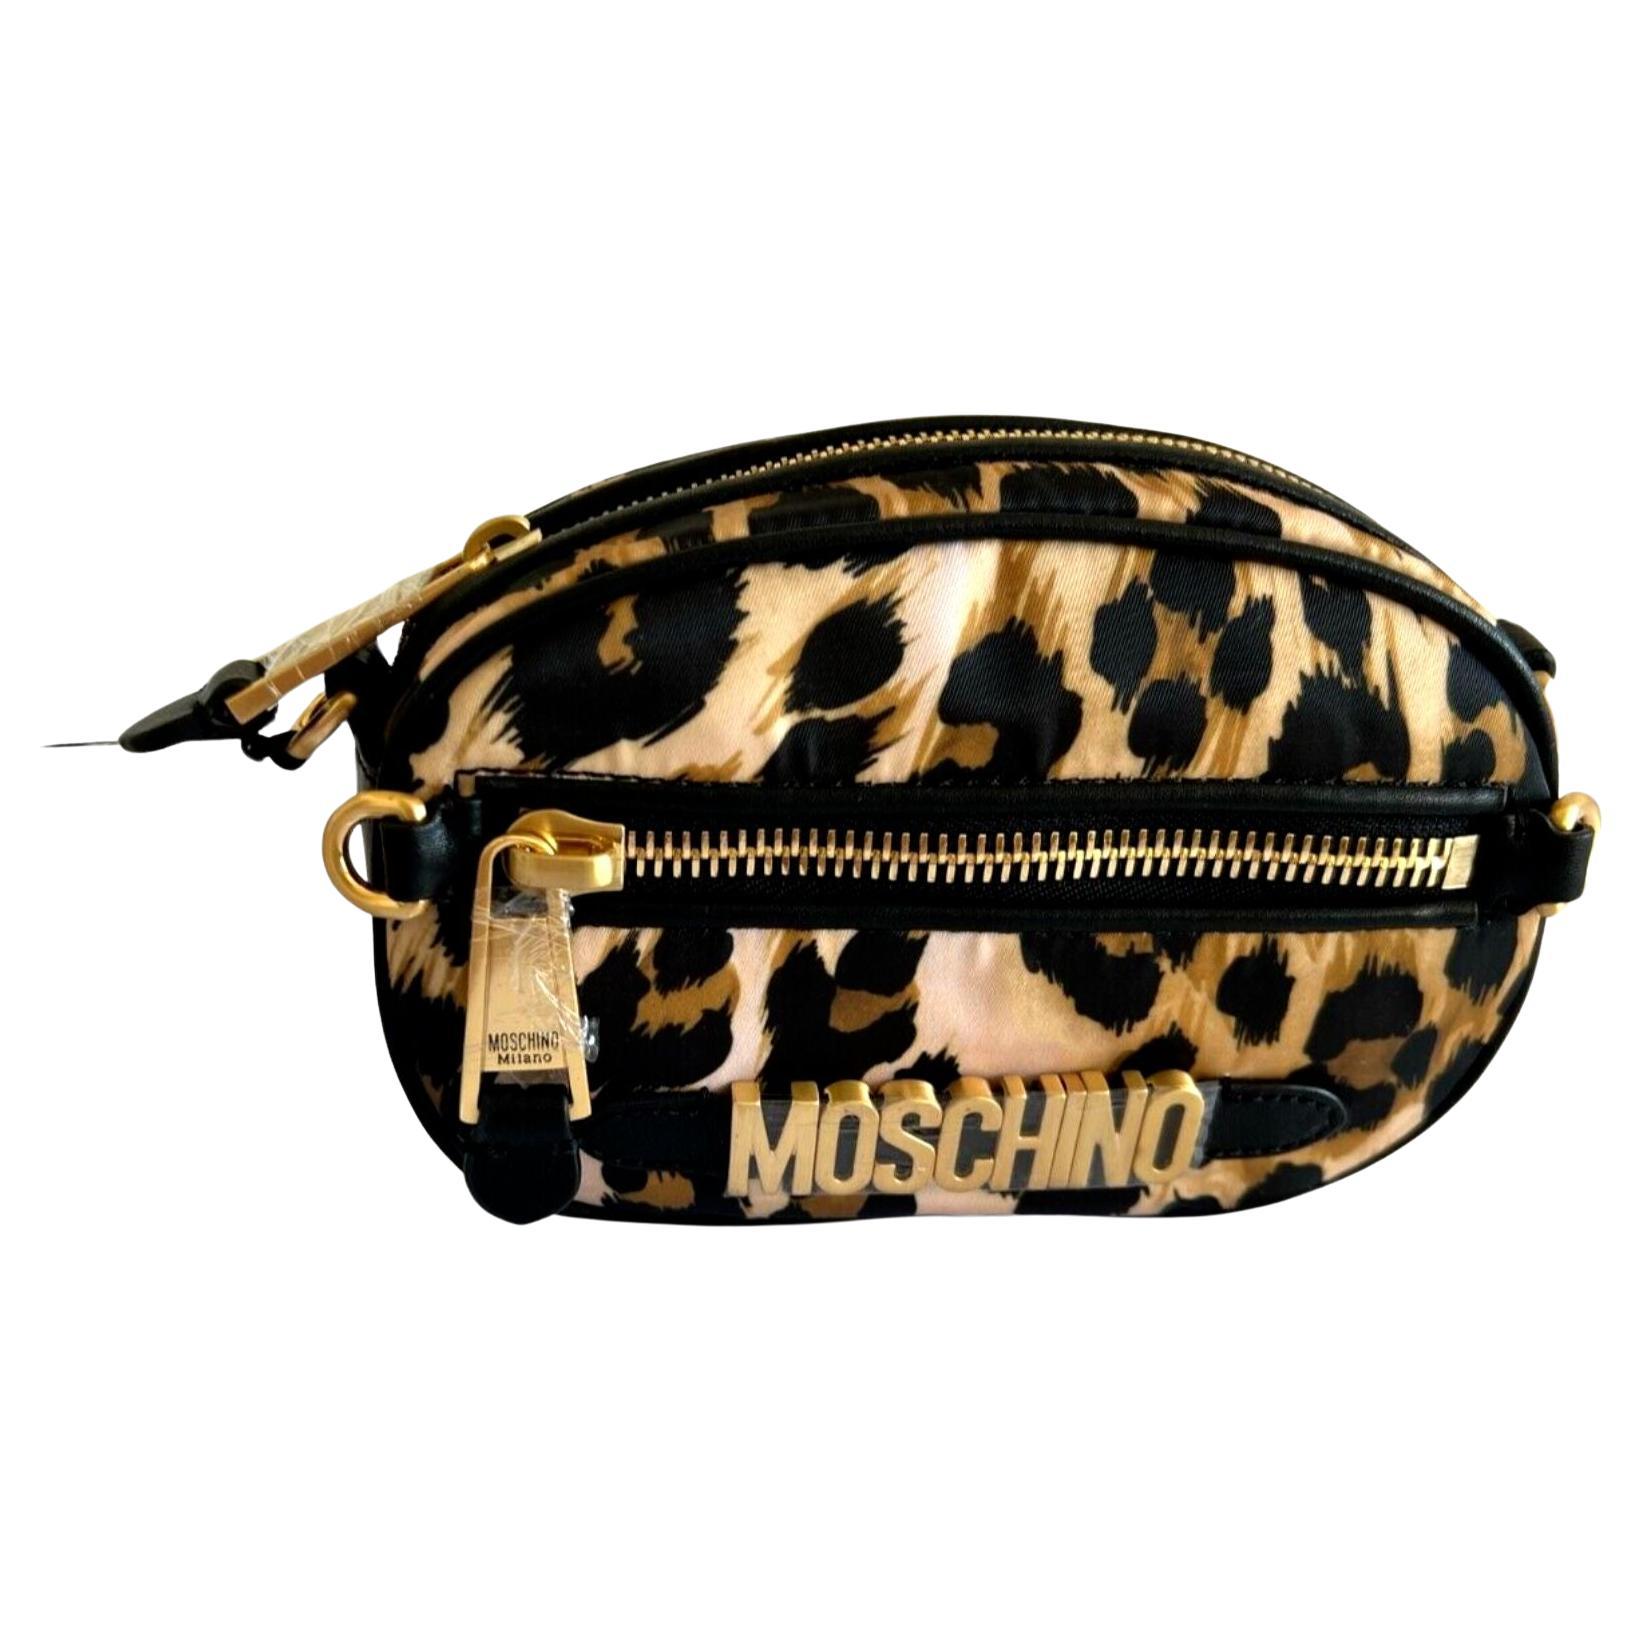 AW21 Moschino Couture Allover Leopard Print Shoulder Bag by Jeremy Scott